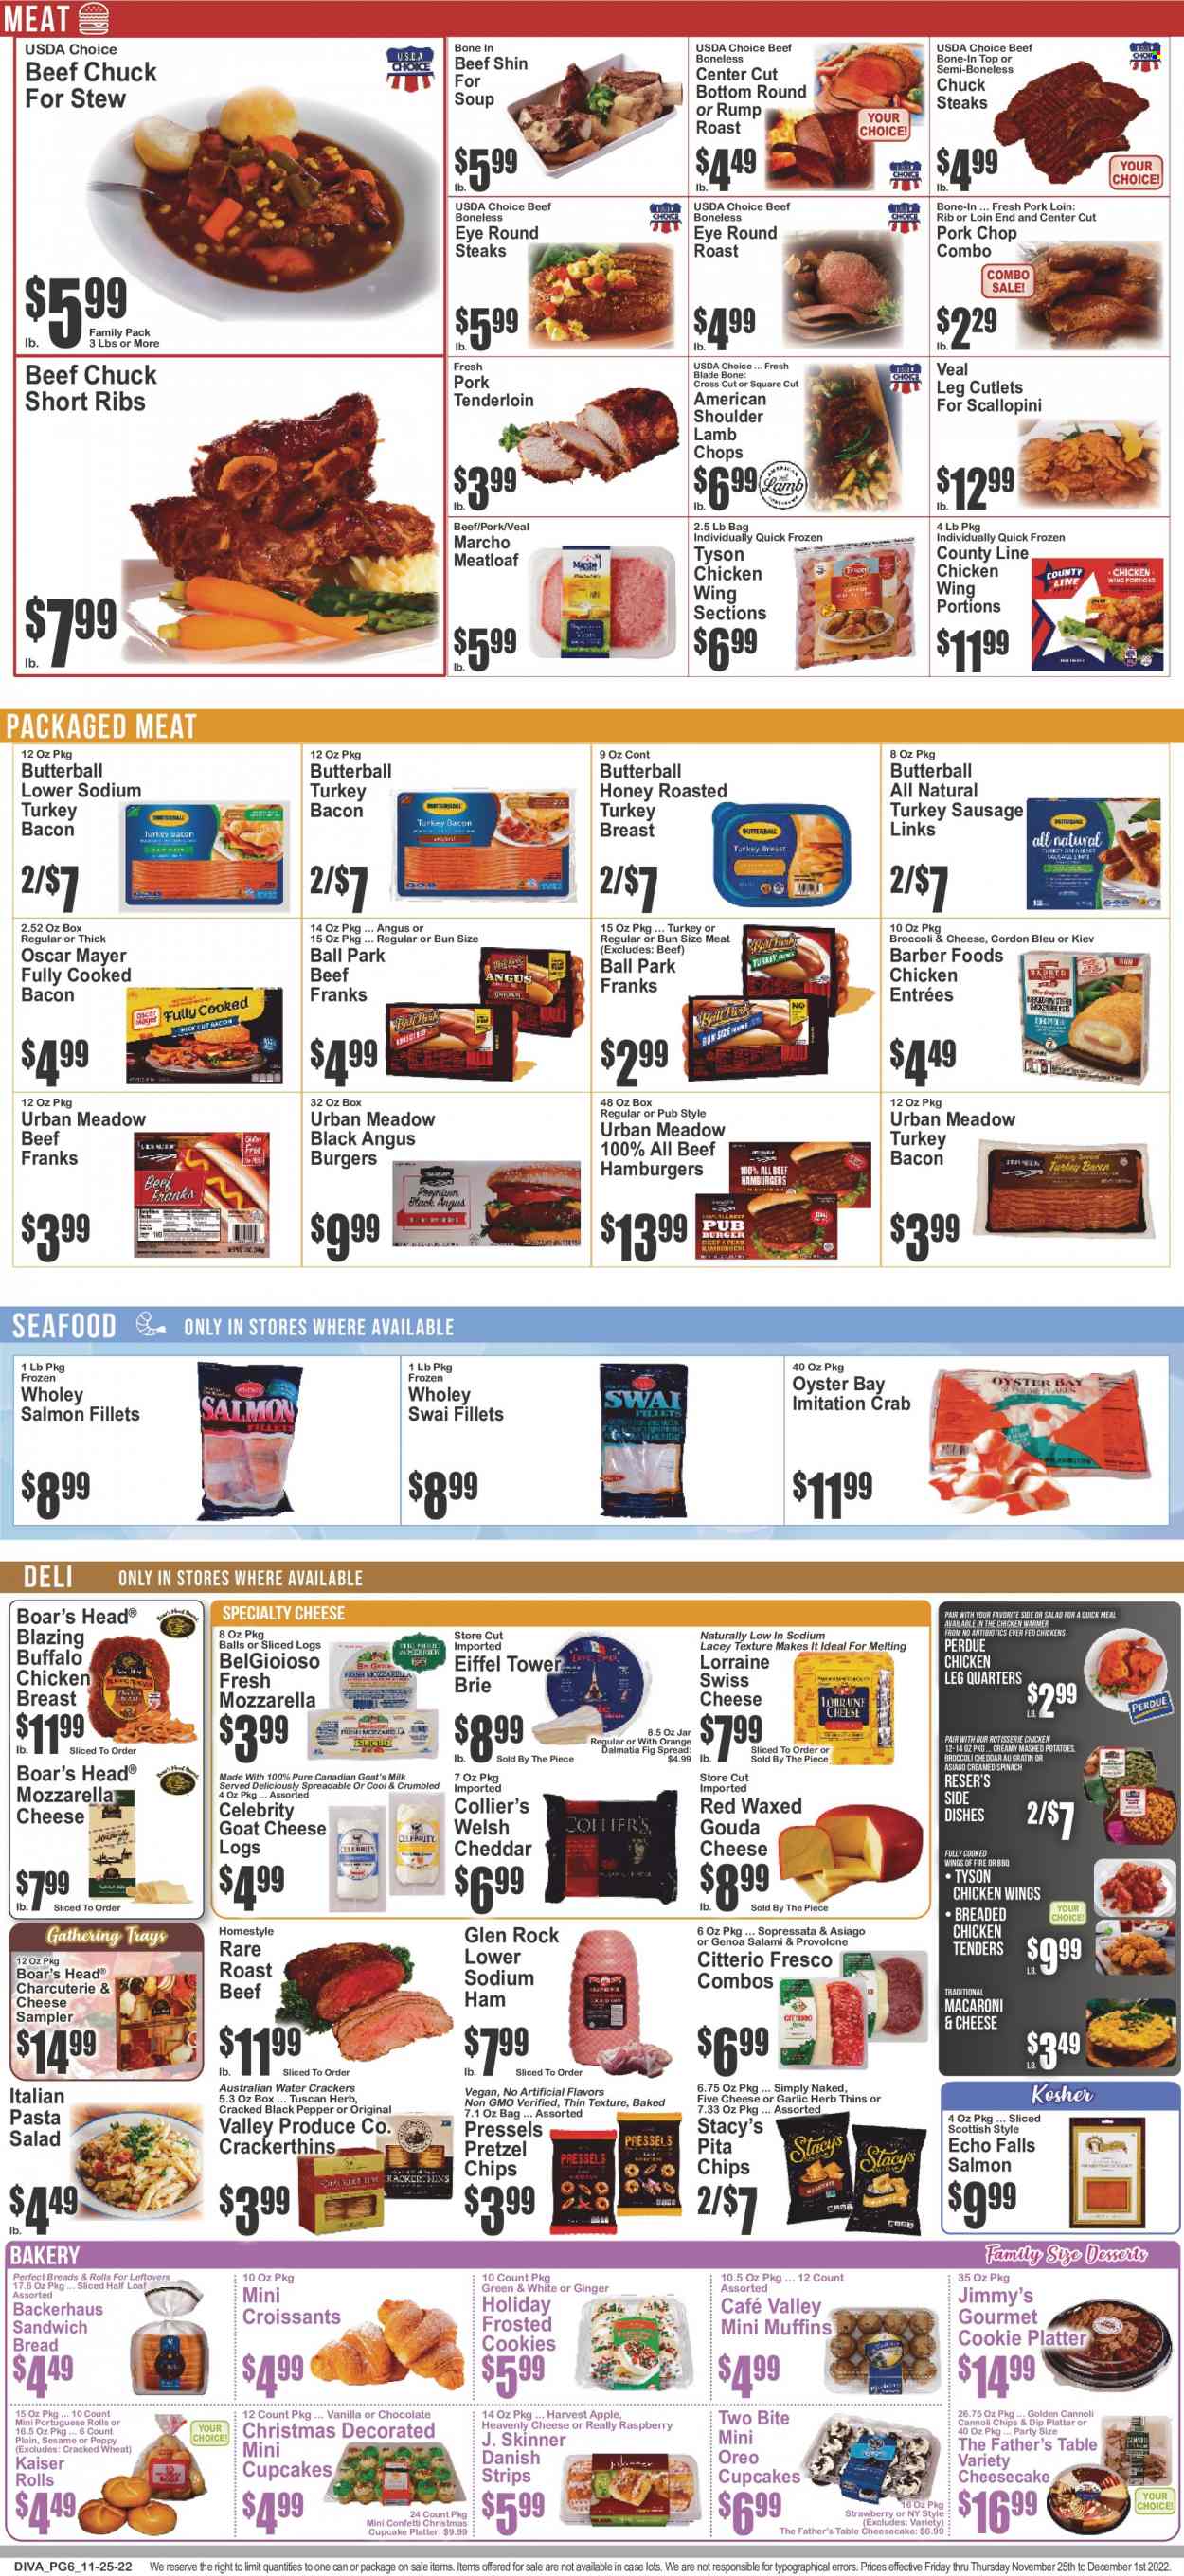 thumbnail - Key Food Flyer - 11/25/2022 - 12/01/2022 - Sales products - bread, pretzels, croissant, Father's Table, cupcake, cheesecake, muffin, broccoli, garlic, ginger, oranges, salmon, salmon fillet, oysters, seafood, crab, swai fillet, macaroni & cheese, mashed potatoes, chicken roast, soup, hamburger, pasta, fried chicken, meatloaf, Perdue®, bacon, Butterball, salami, turkey bacon, ham, Oscar Mayer, sausage, pasta salad, asiago, goat cheese, gouda, mozzarella, swiss cheese, brie, Provolone, Oreo, milk, dip, chicken wings, cordon bleu, strips, cookies, crackers, Thins, pita chips, Skinner Pasta, black pepper, honey, chicken legs, beef meat, steak, round roast, roast beef, pork chops, pork loin, pork meat, pork tenderloin, lamb chops, lamb meat, beef bone. Page 6.